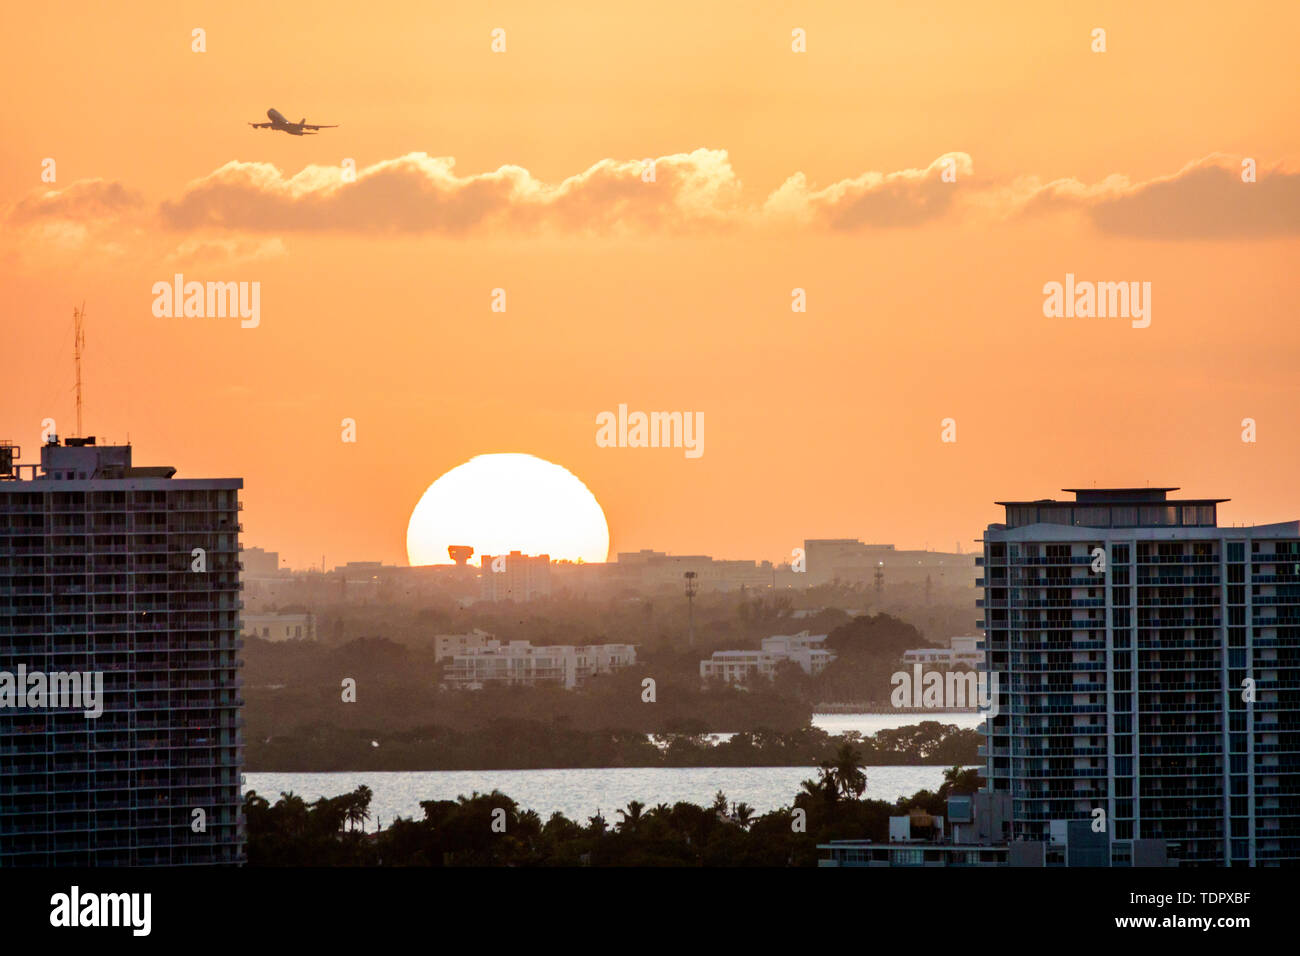 Miami Florida,Biscayne Bay water,North Bay water Village Island,sunset,city skyline cityscape,buildings,amber color sky,orb,jet aircraft commercial ai Stock Photo